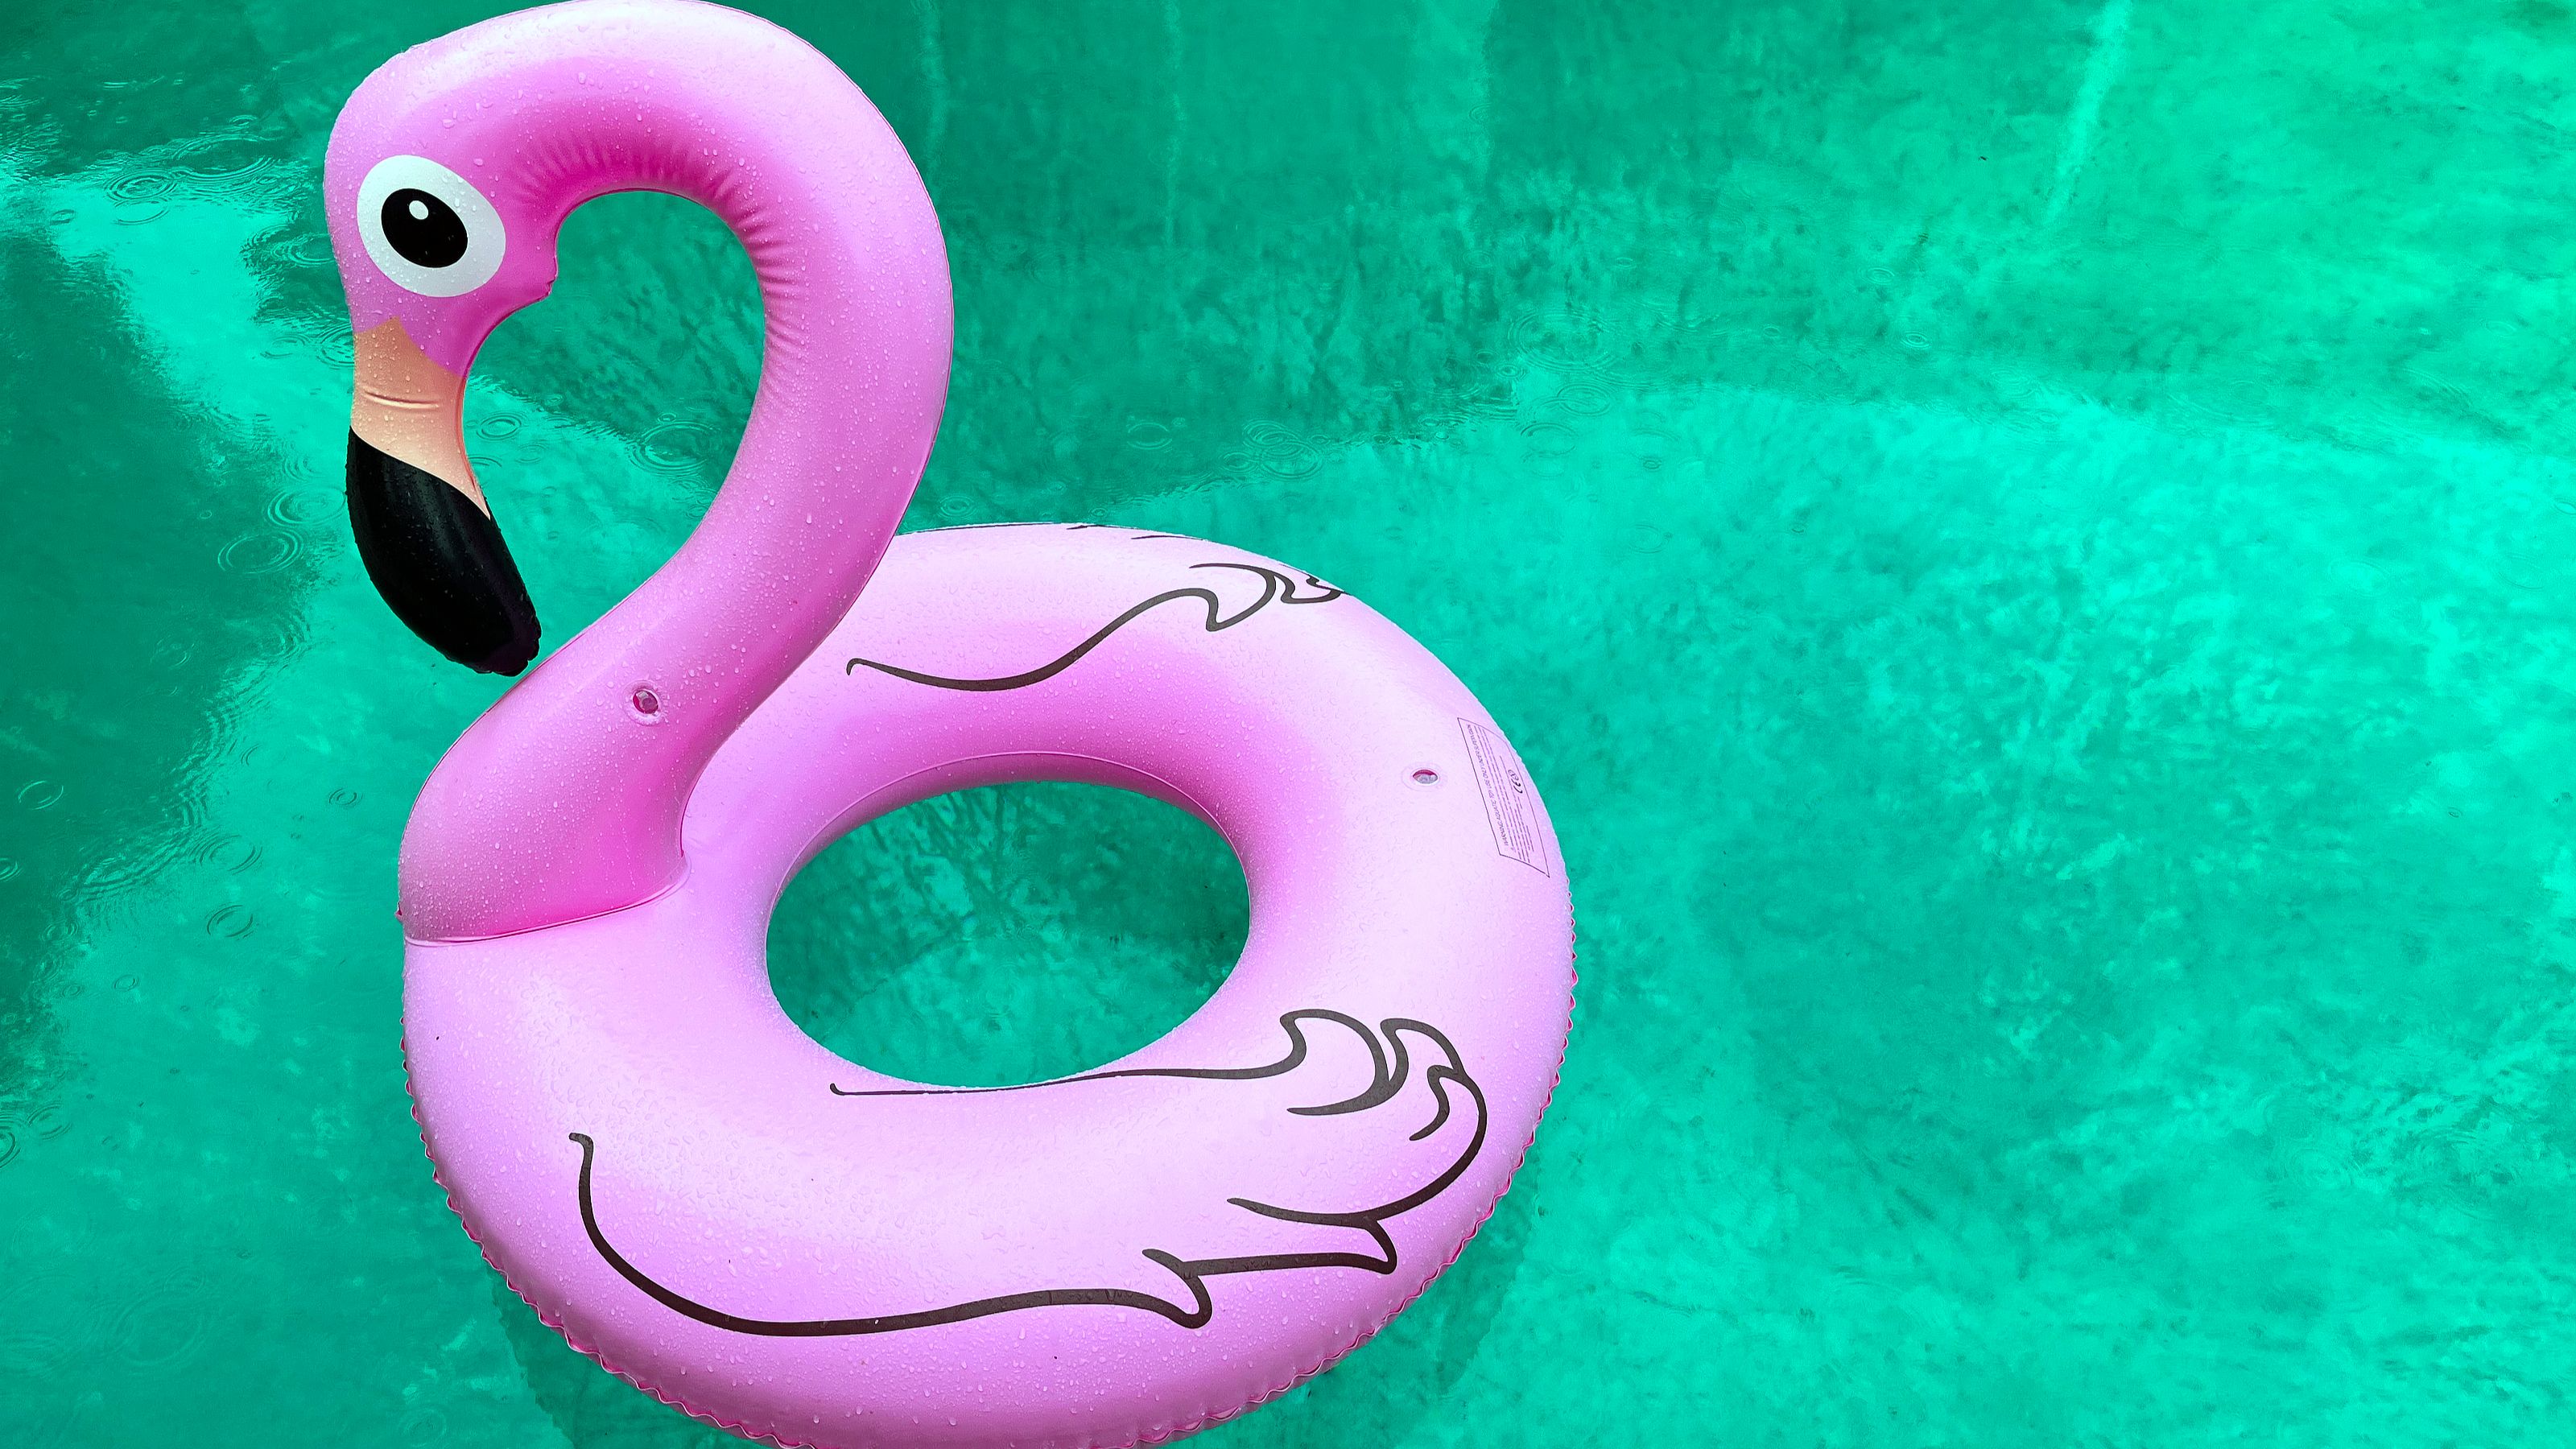 A pink flamingo pool float in bright turquoise water.